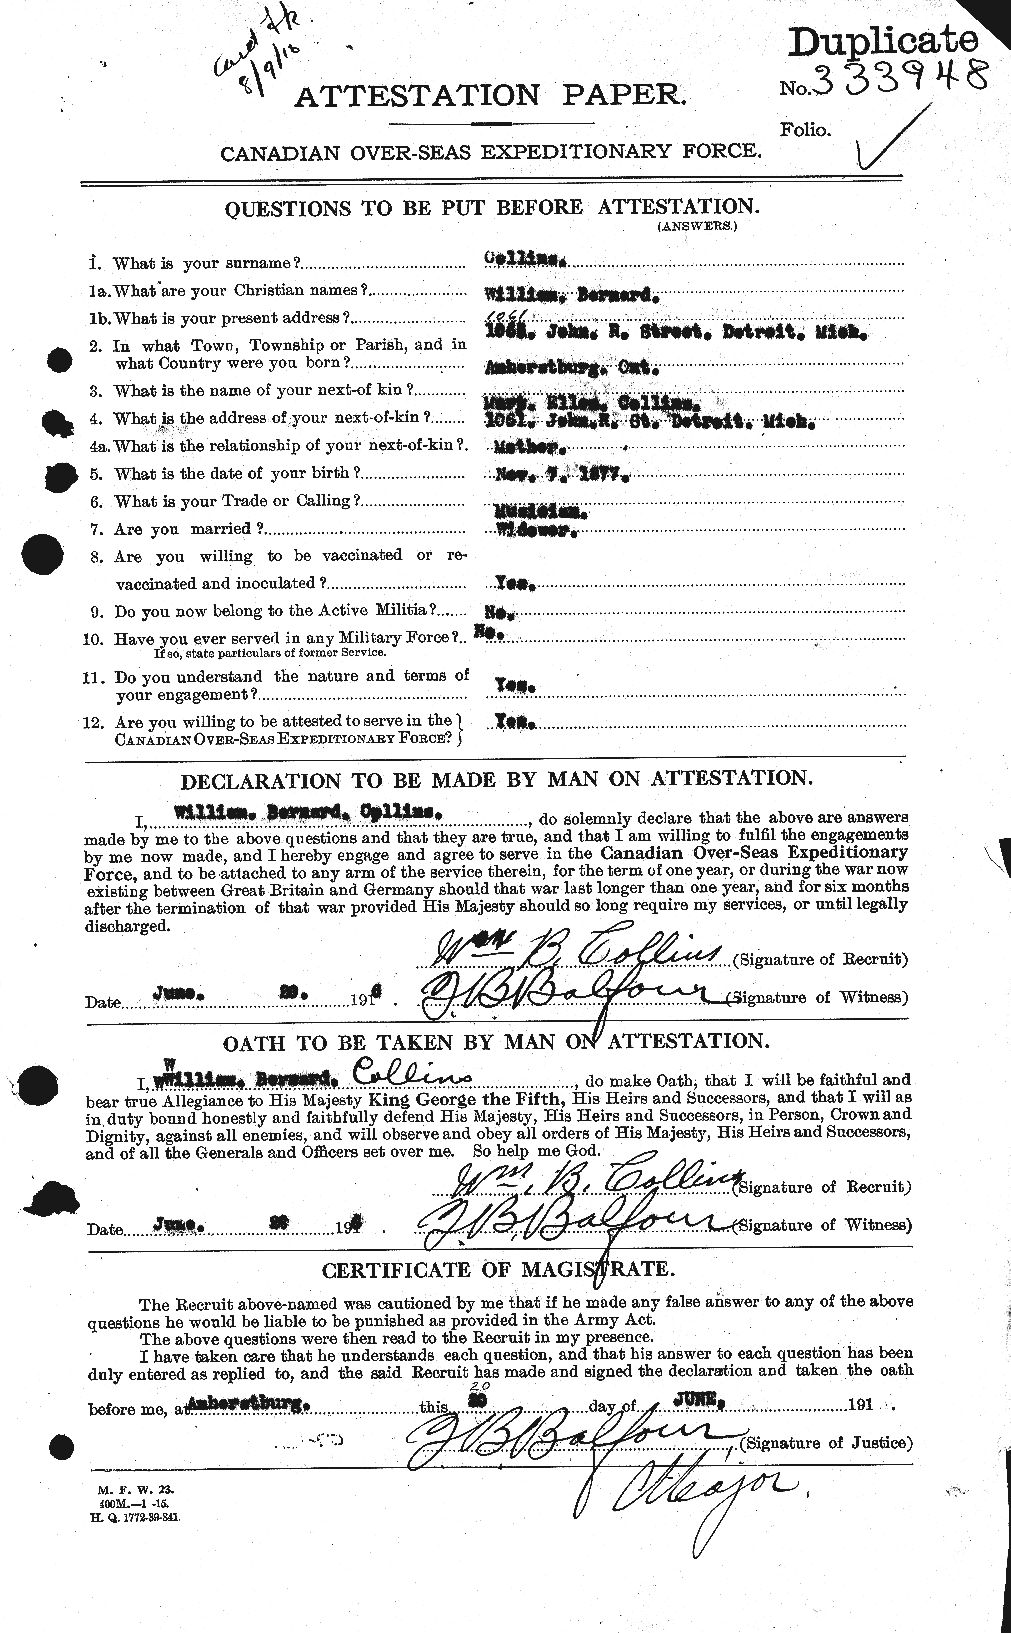 Personnel Records of the First World War - CEF 068806a